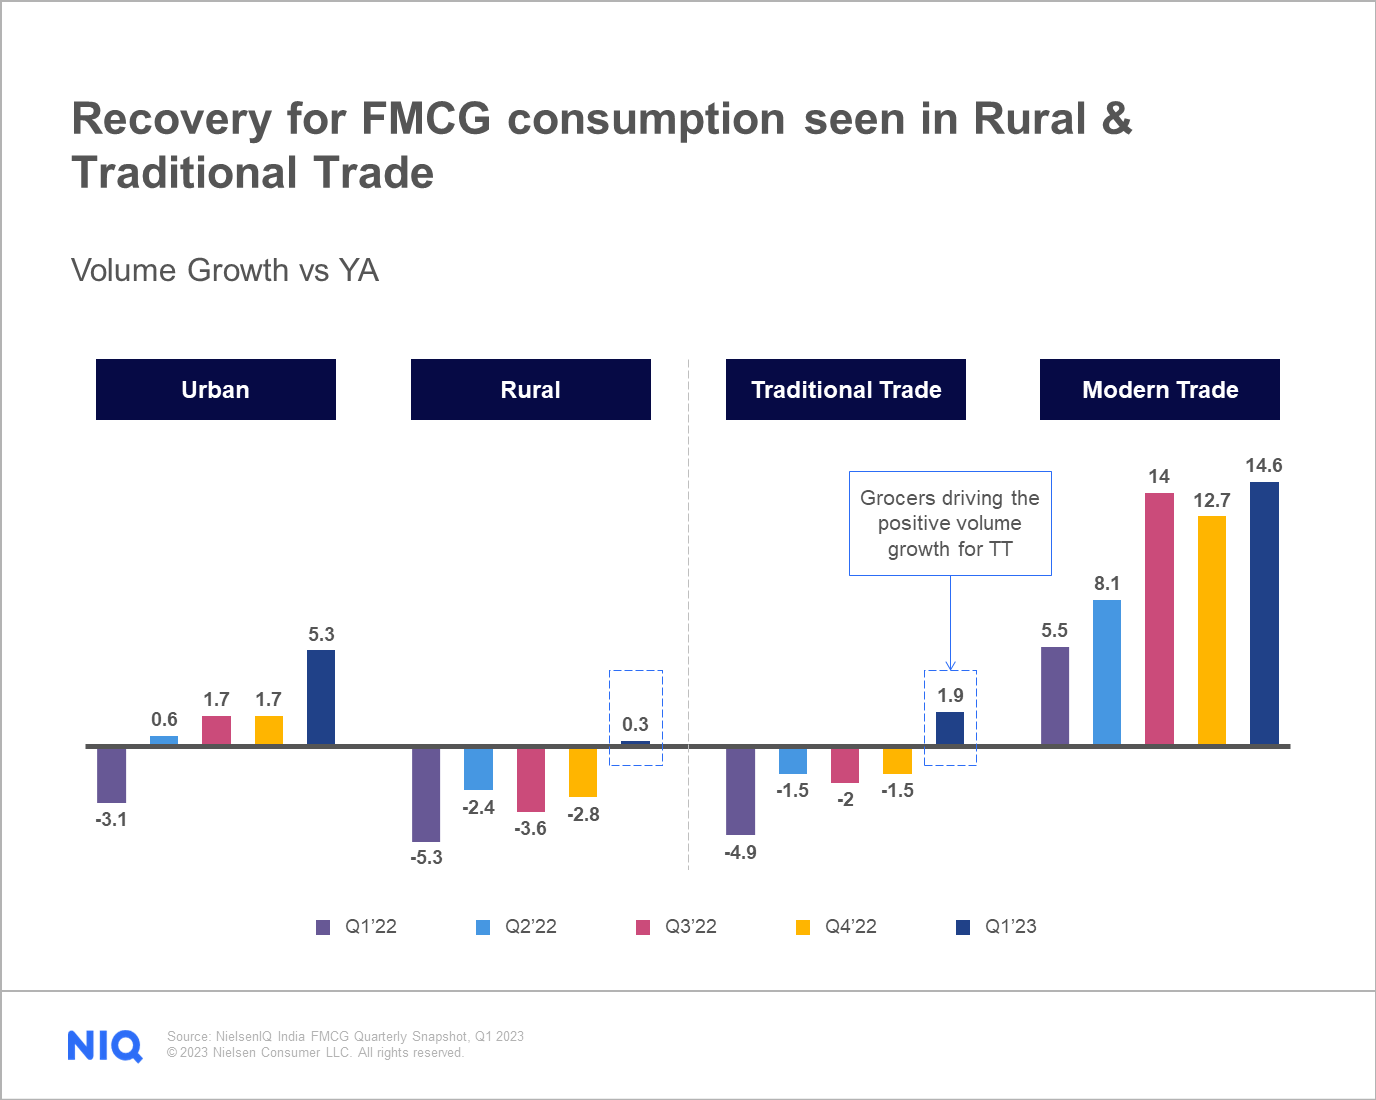 Recovery for FMCG consumption seen in Rural & Traditional Trade